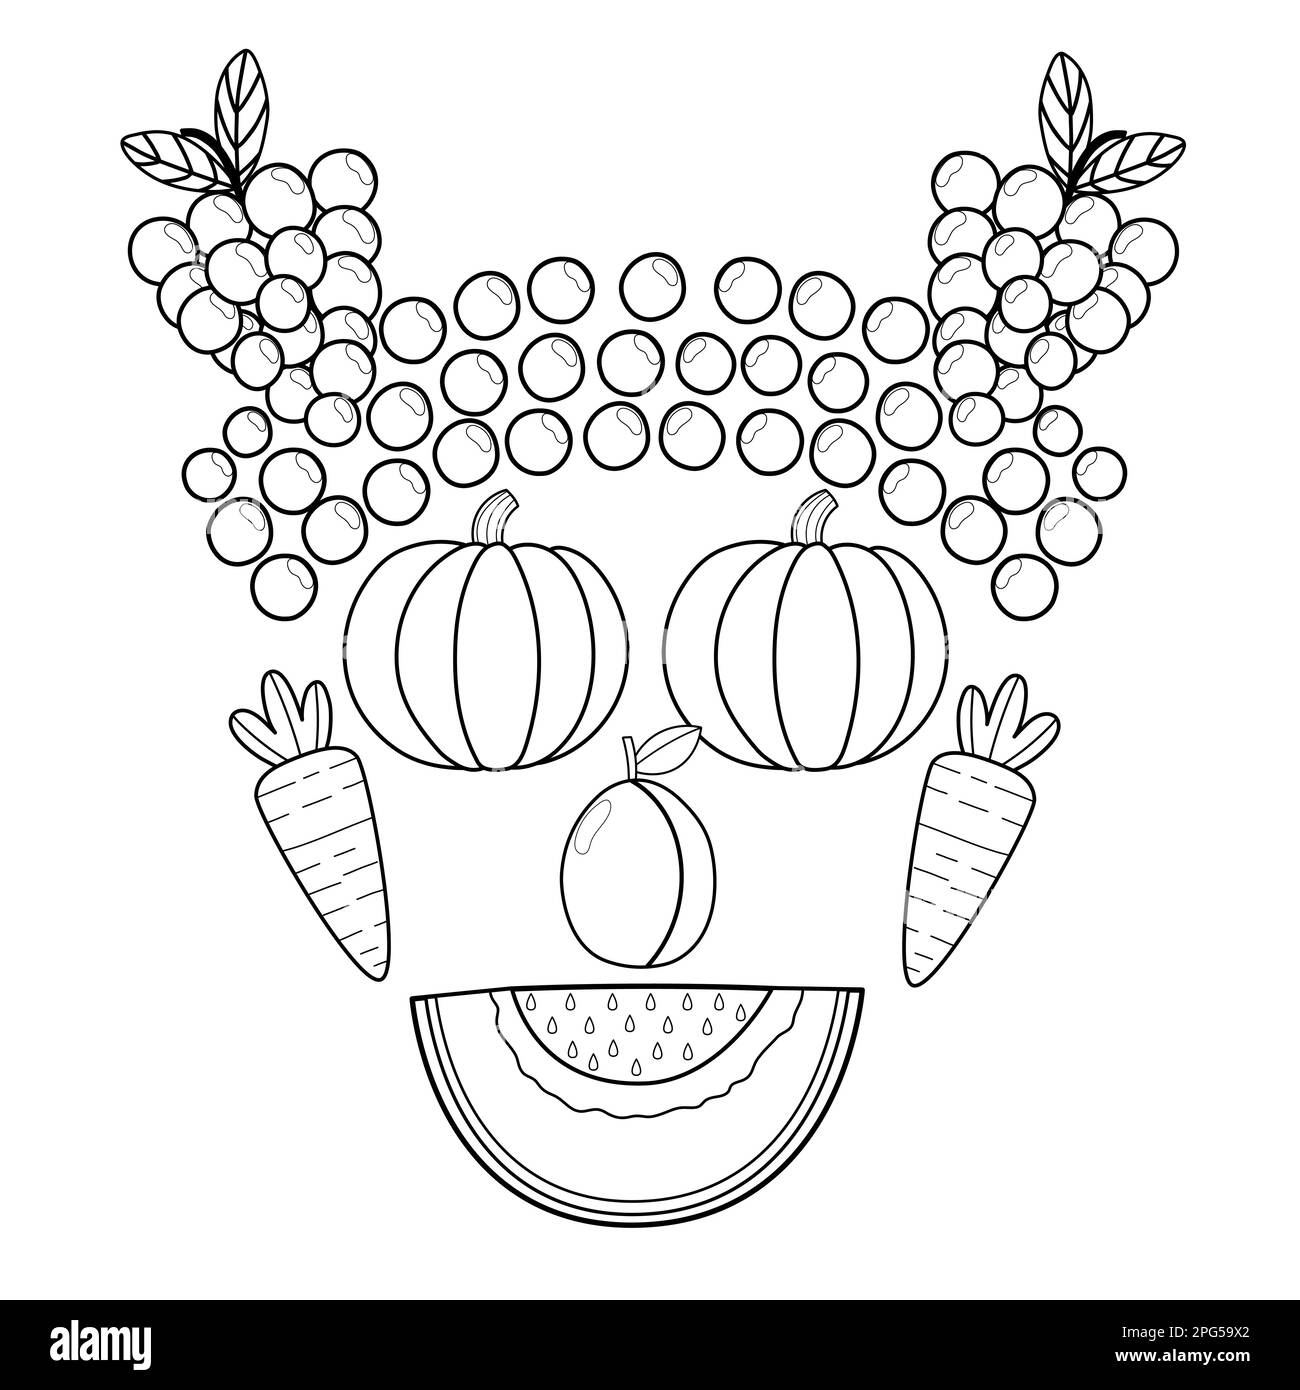 Black and white fruit and vegetable face. Funny healthy coloring page head Stock Vector